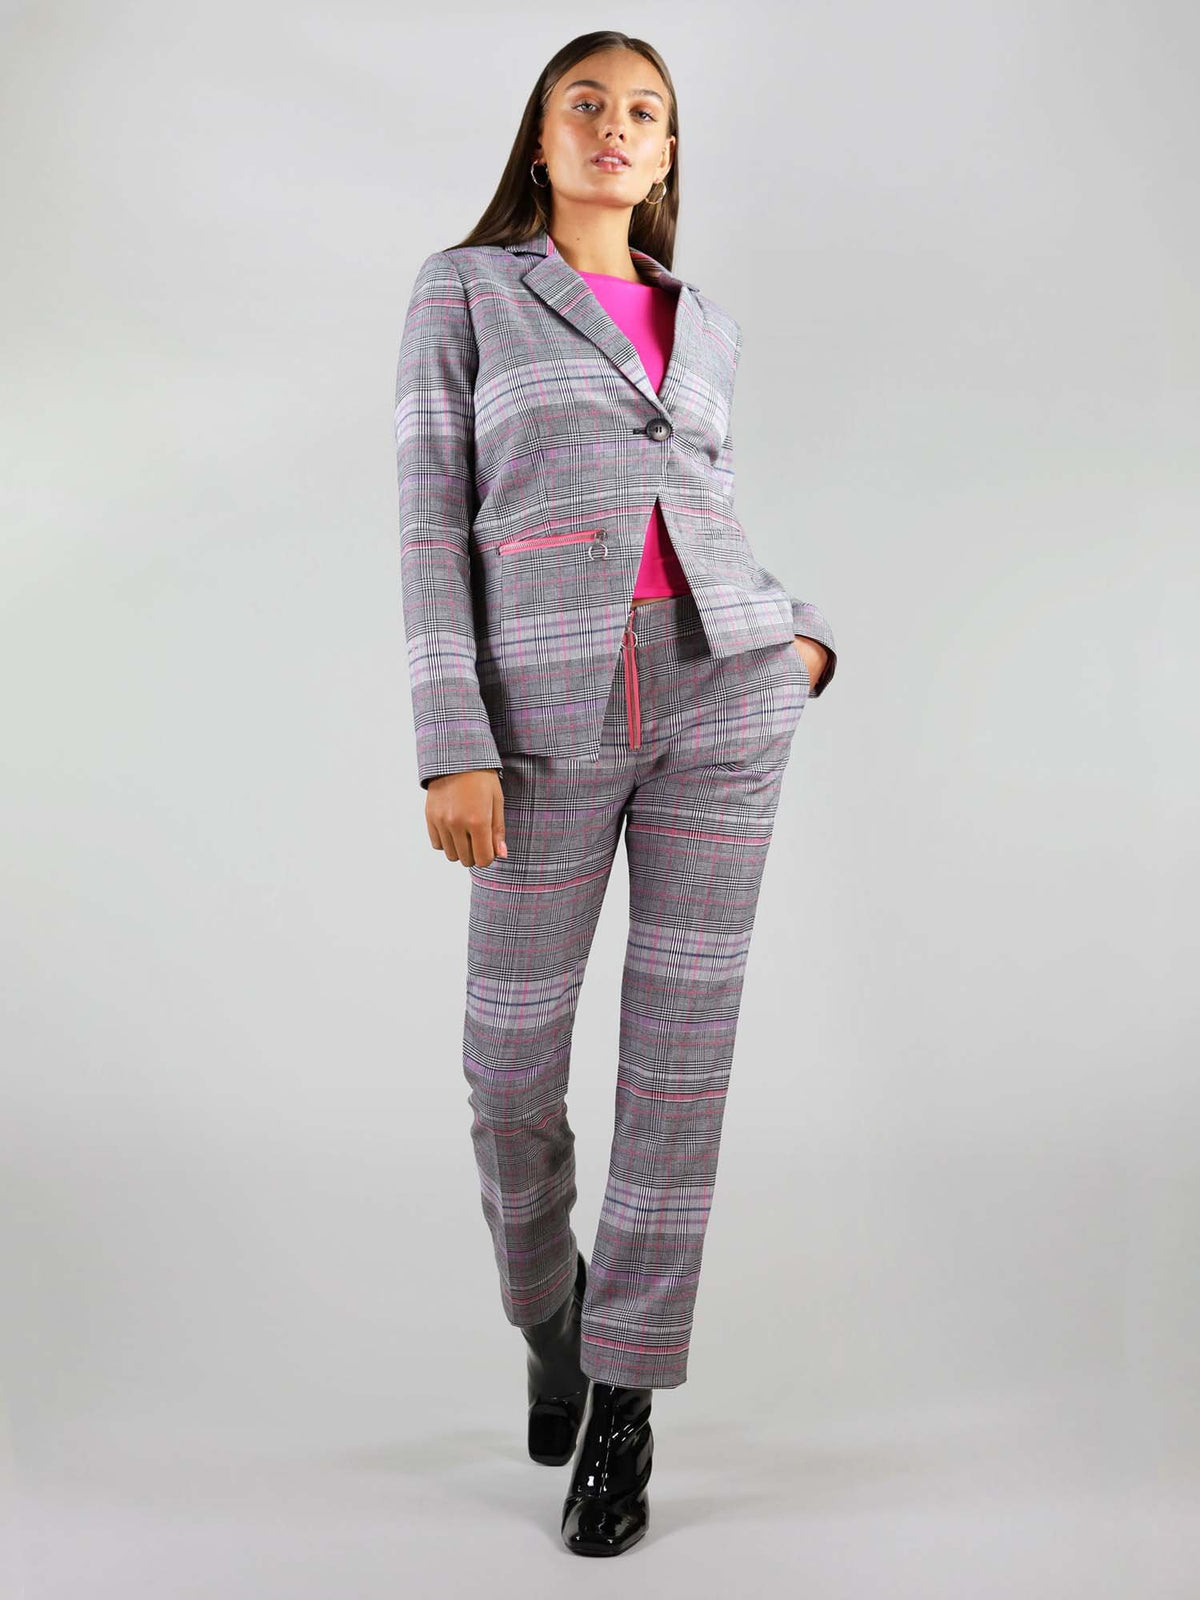 The revivify blazer comes in many different sizes. The jacket has boxy fit and asymmetric shape design. The colour is different shades of grey and contrast pink lining.